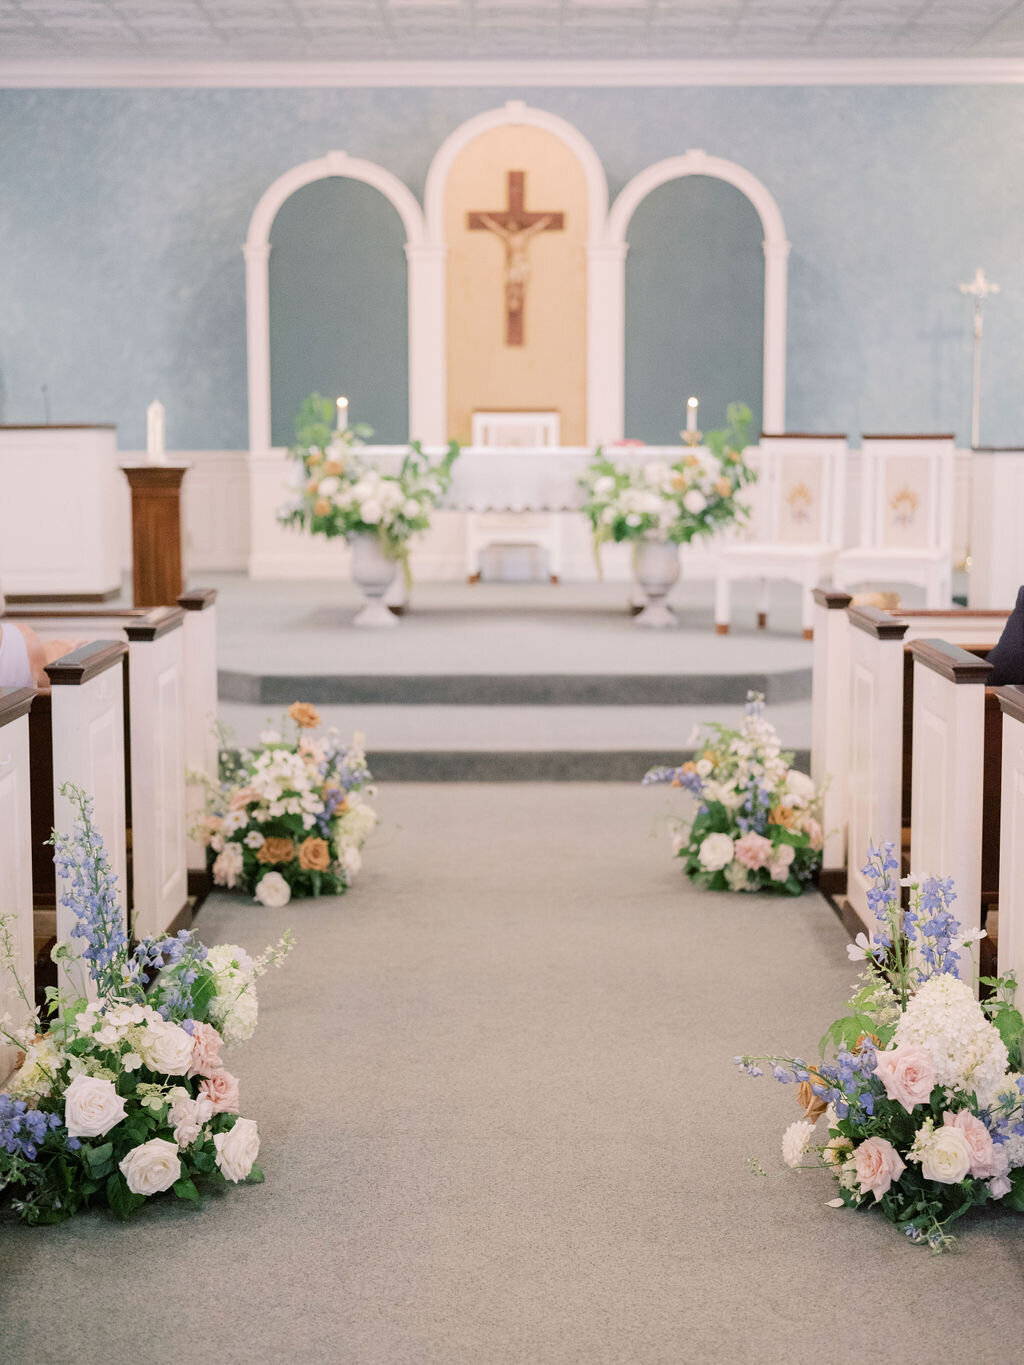 Ceremony in Sacred Heart Catholic Church in Chestertown MD with ground arrangements going down the aisle and two large arrangements in urns at the altar with florals such as blue delphinium, white hydrangea, blush roses, white dahlias and toffee roses.